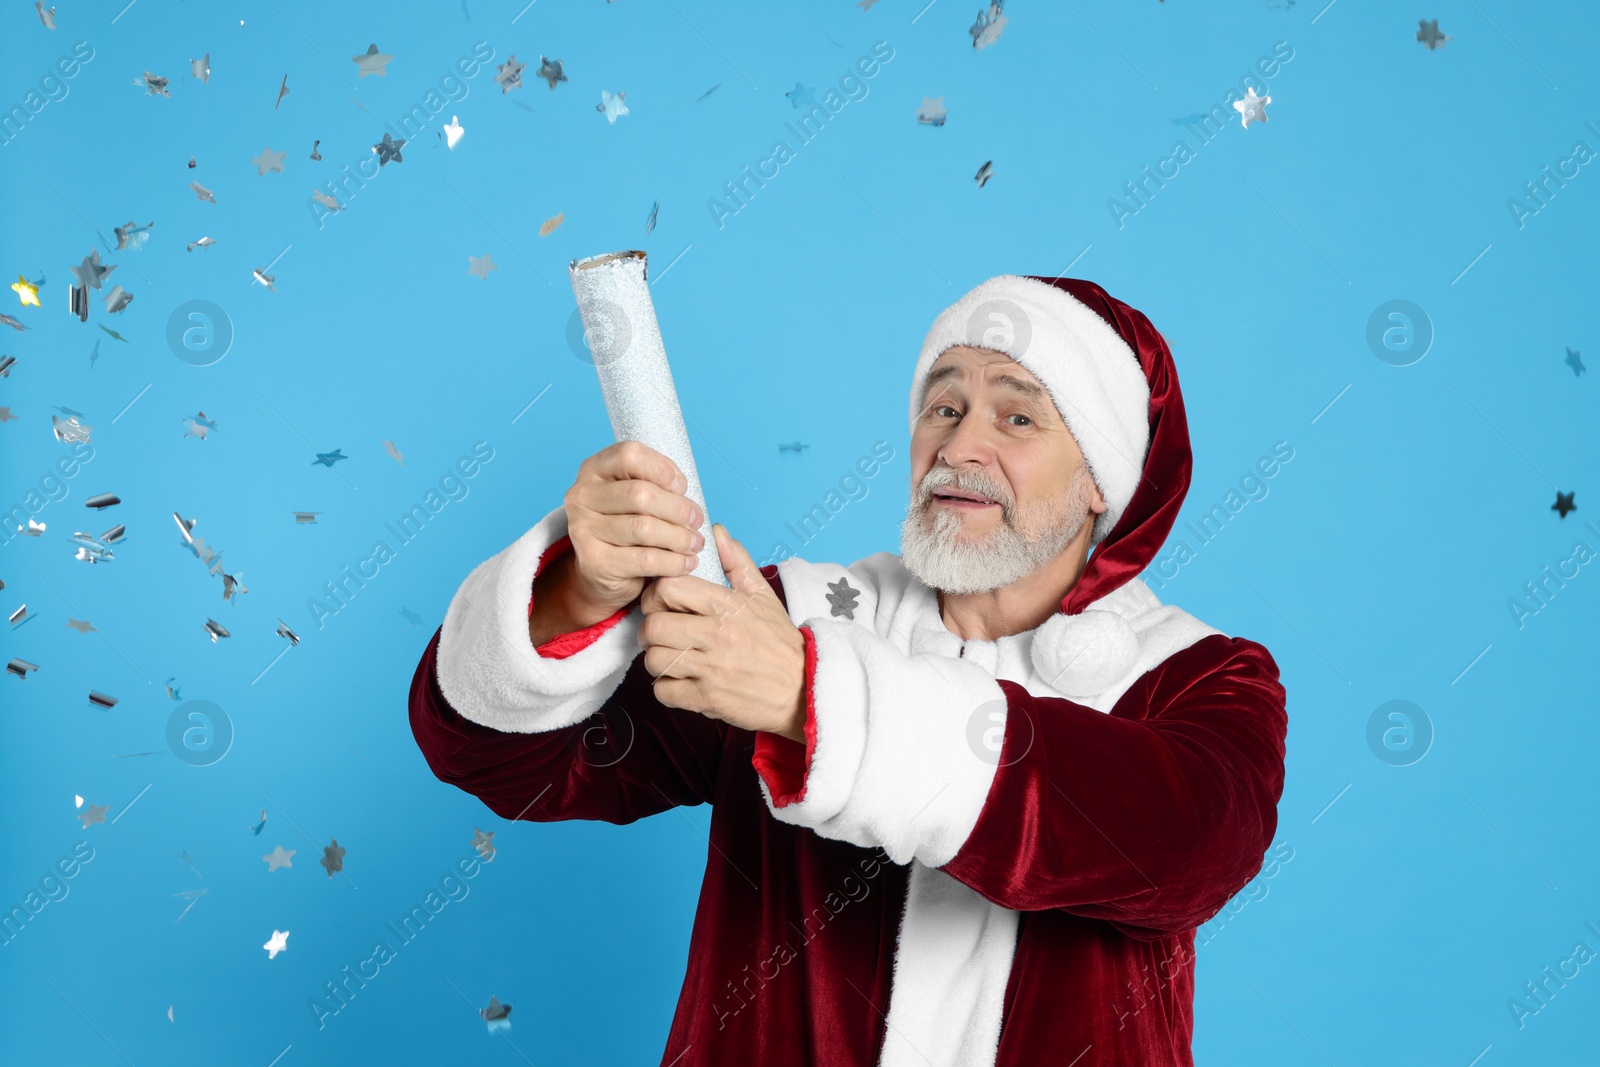 Photo of Man in Santa Claus costume blowing up party popper on light blue background